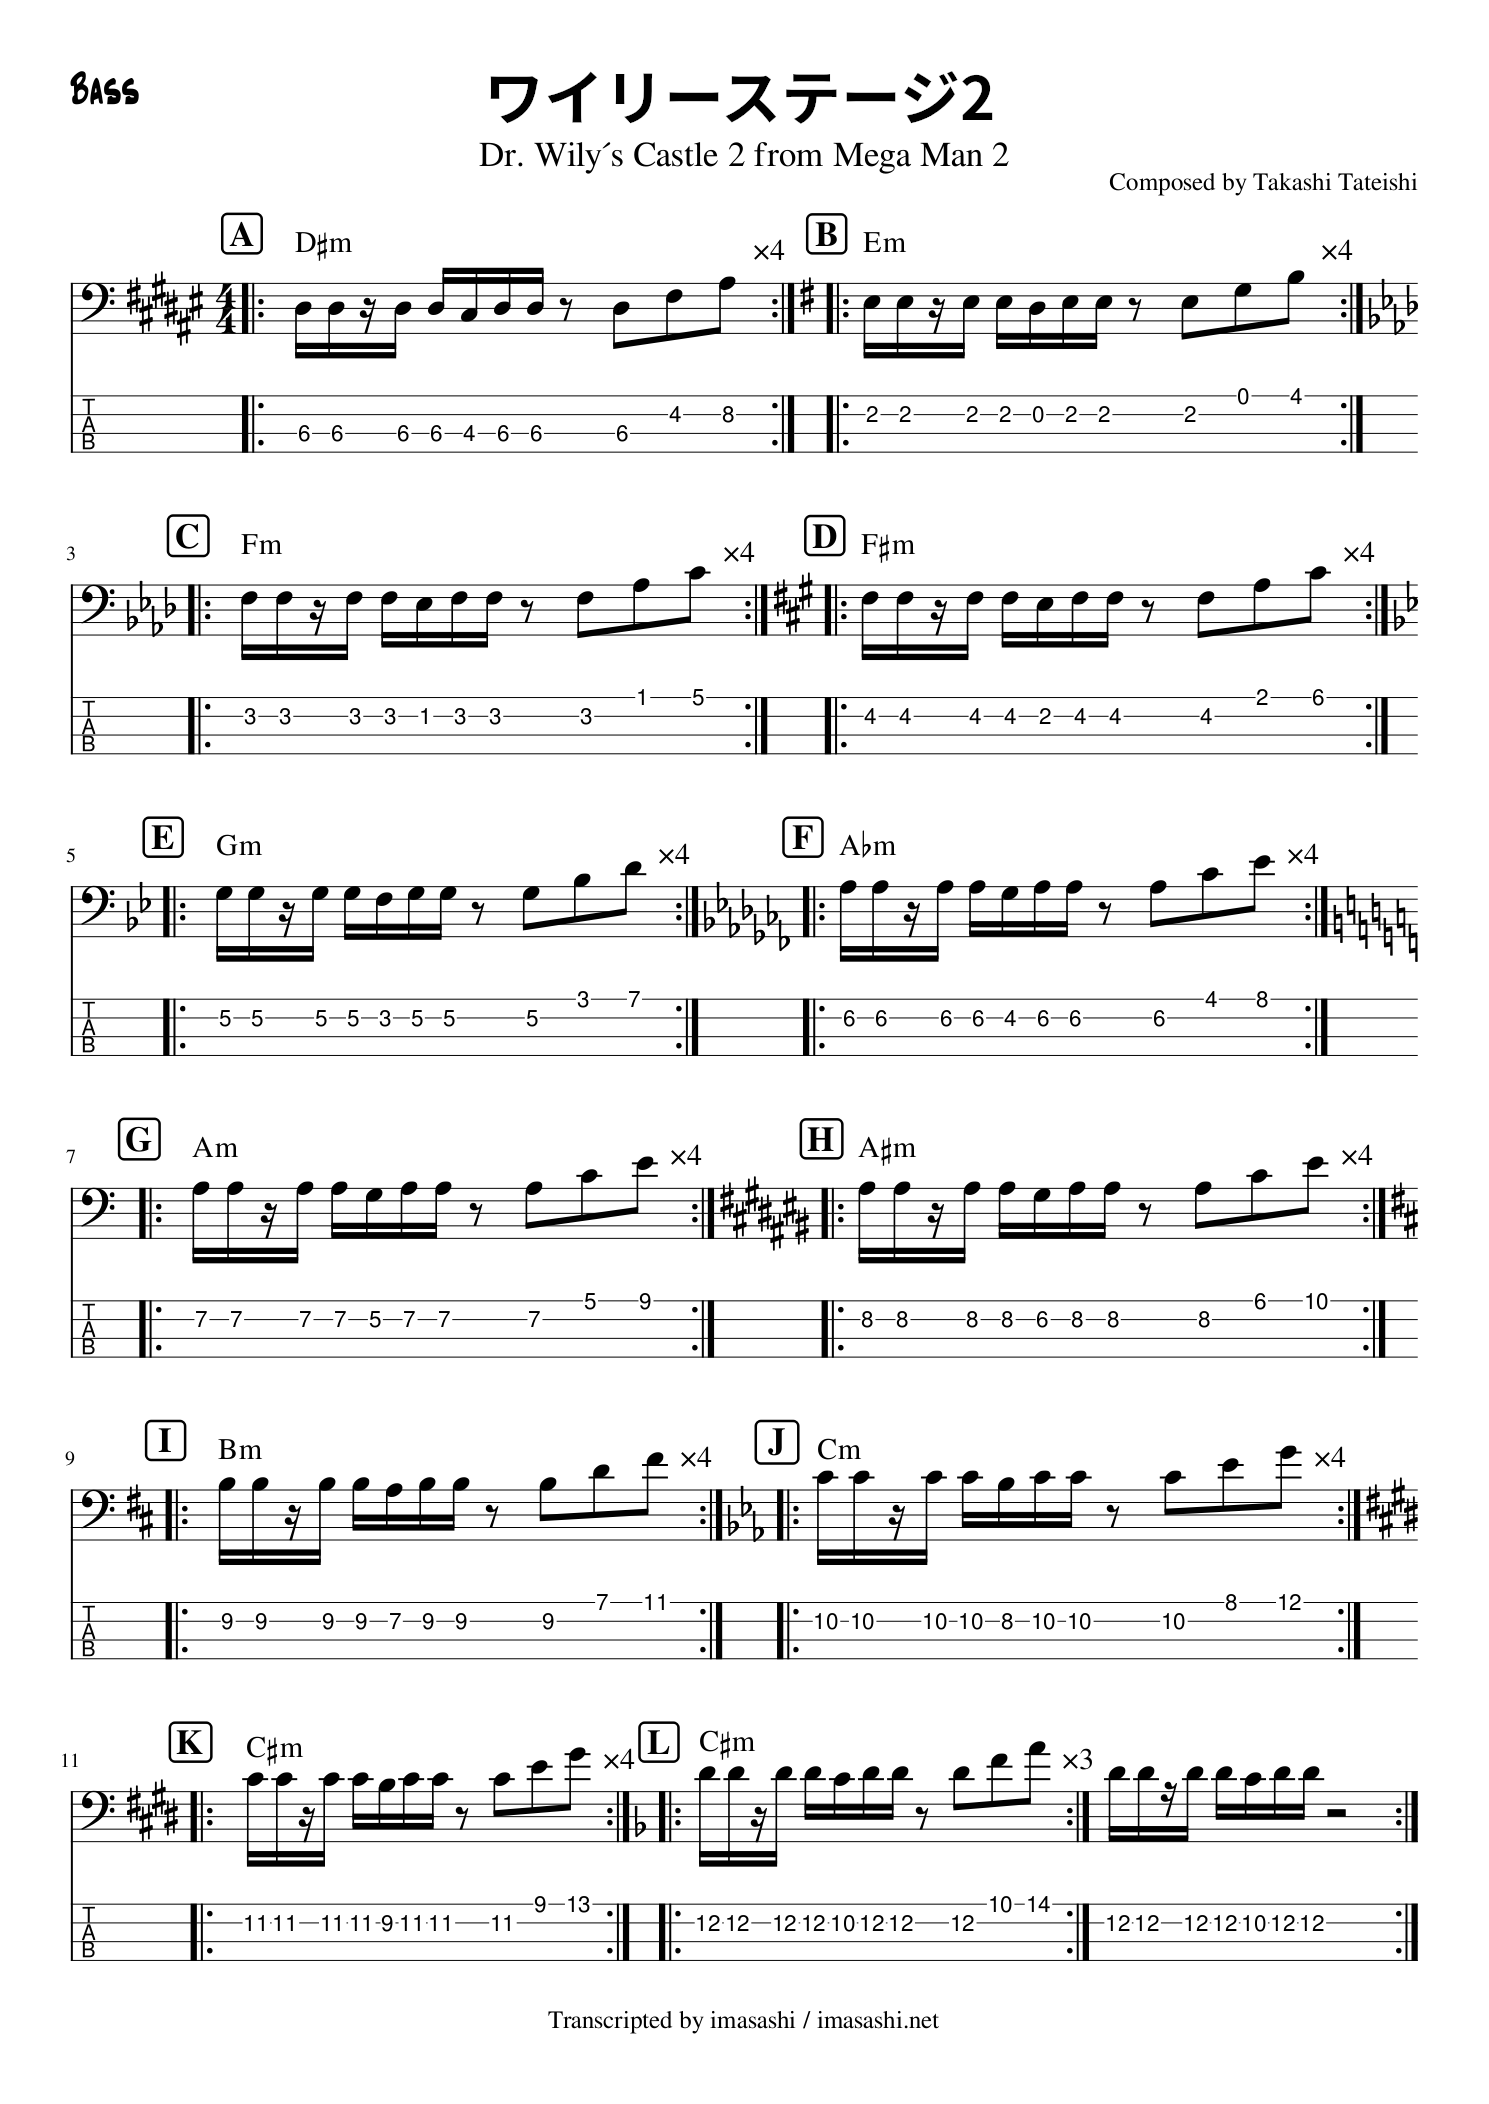 Dr. Wily Stage 2 BGM bass tab